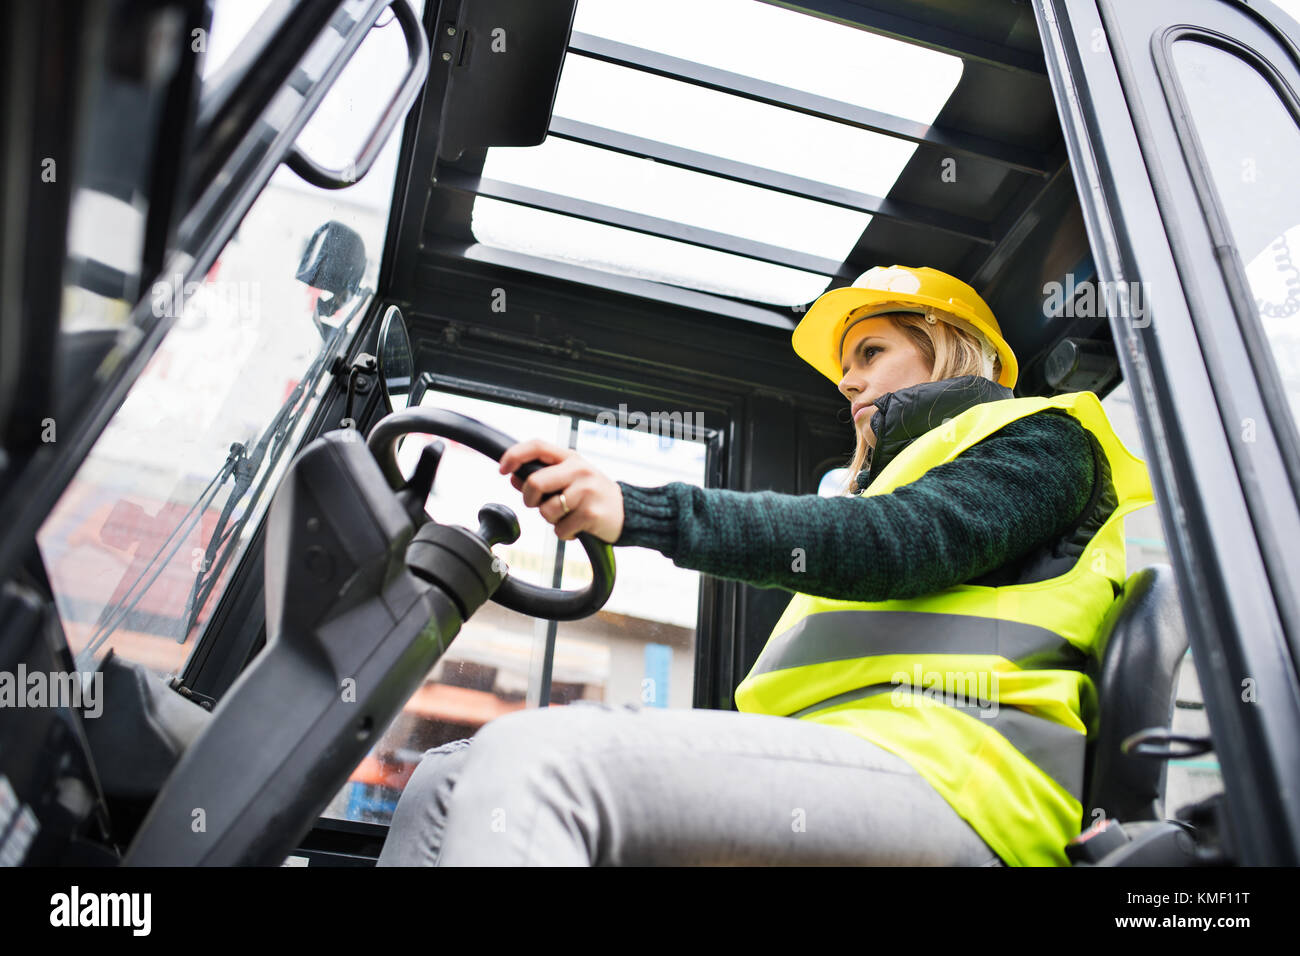 Woman forklift truck driver in an industrial area. Stock Photo